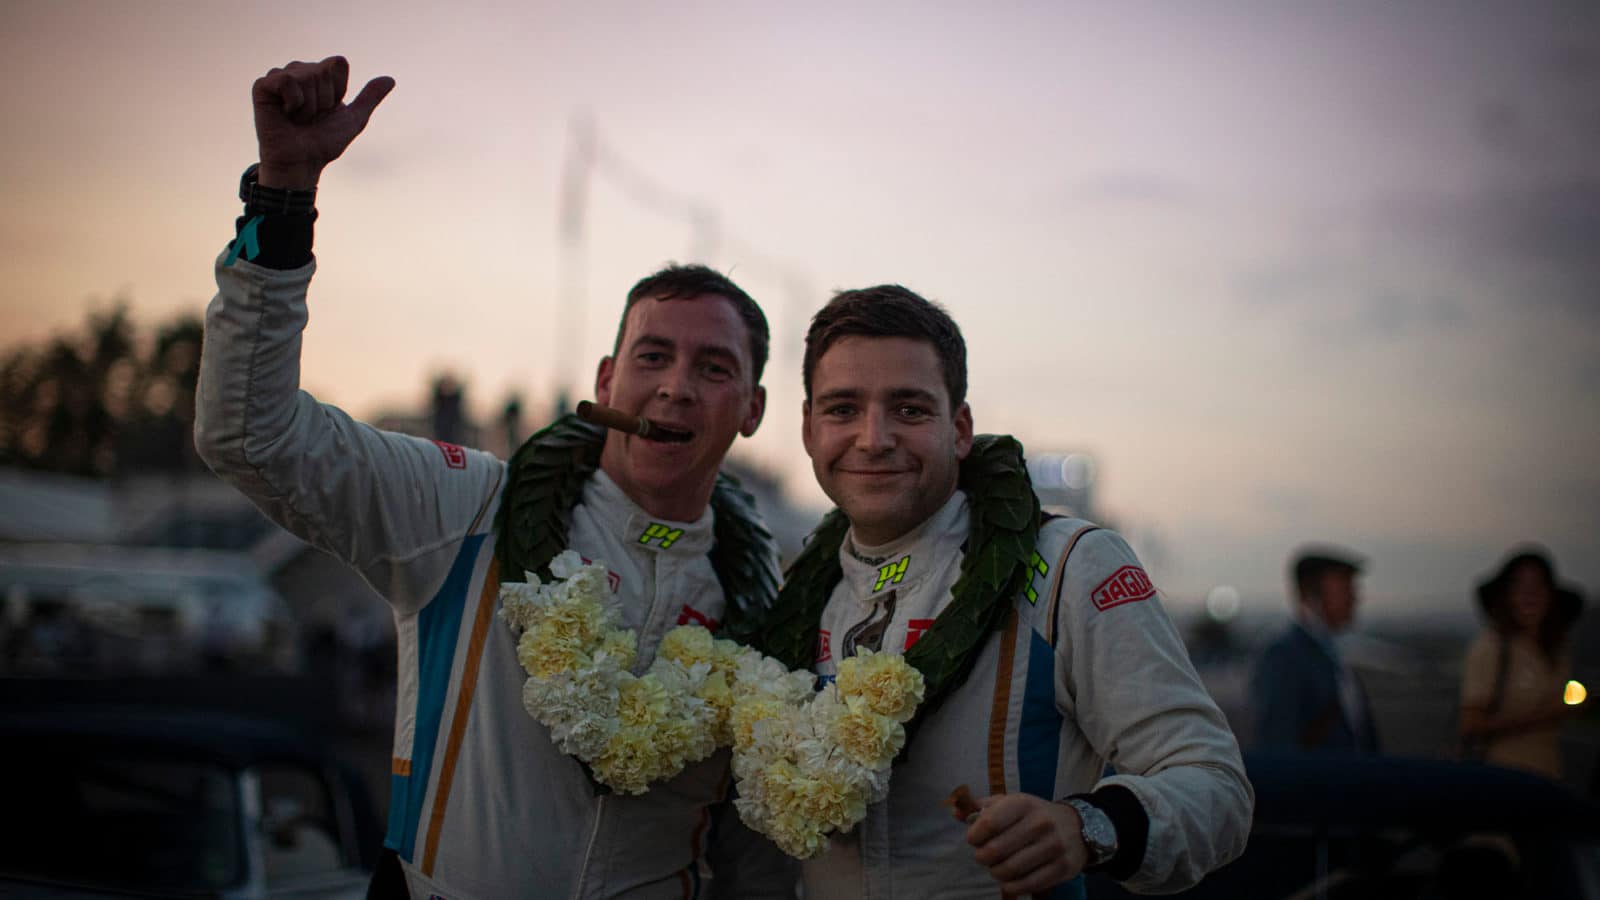 Harvey Stanley (right) celebrates victory at the 2021 Goodwood Revival with DK colleague and established historic racer James Cottingham